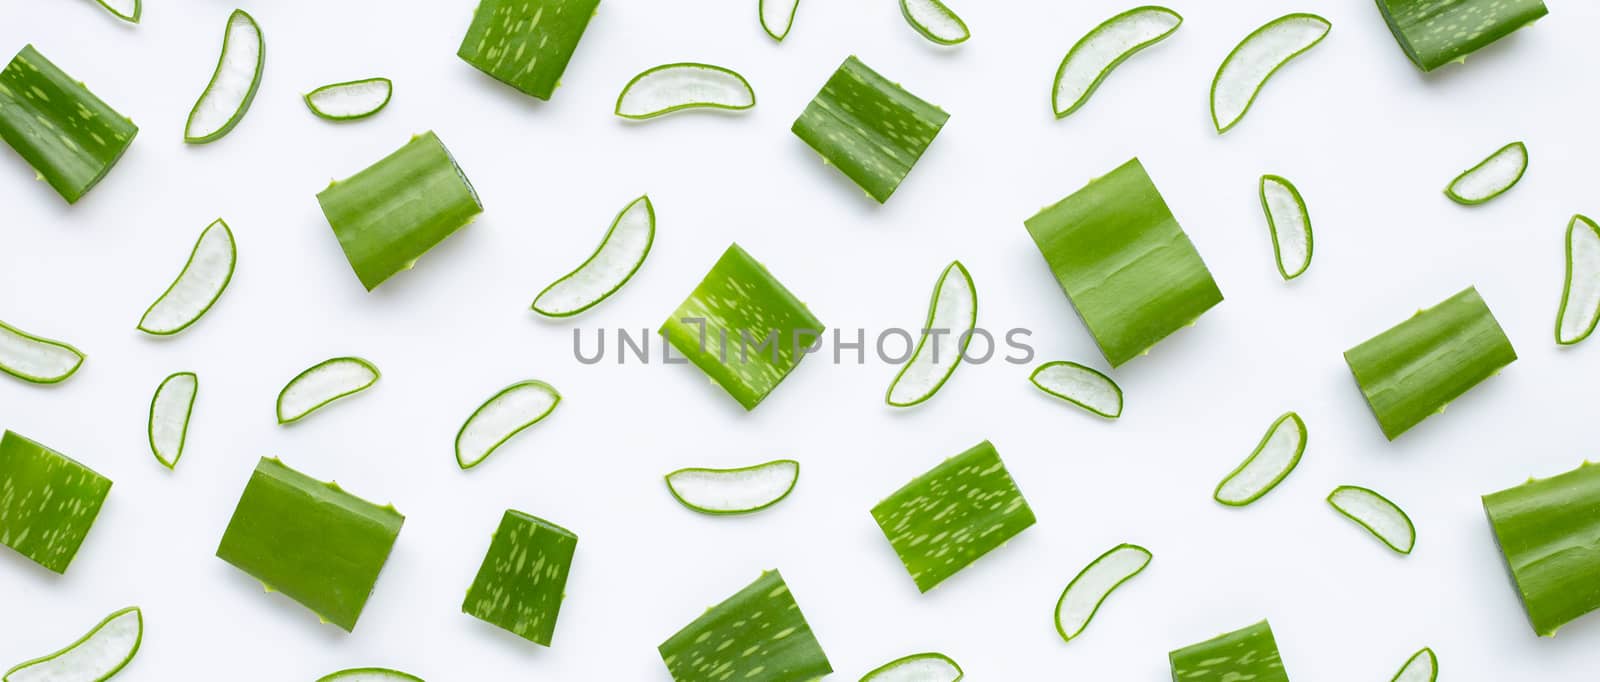 Aloe Vera leaves cut pieces with slices on white by Bowonpat